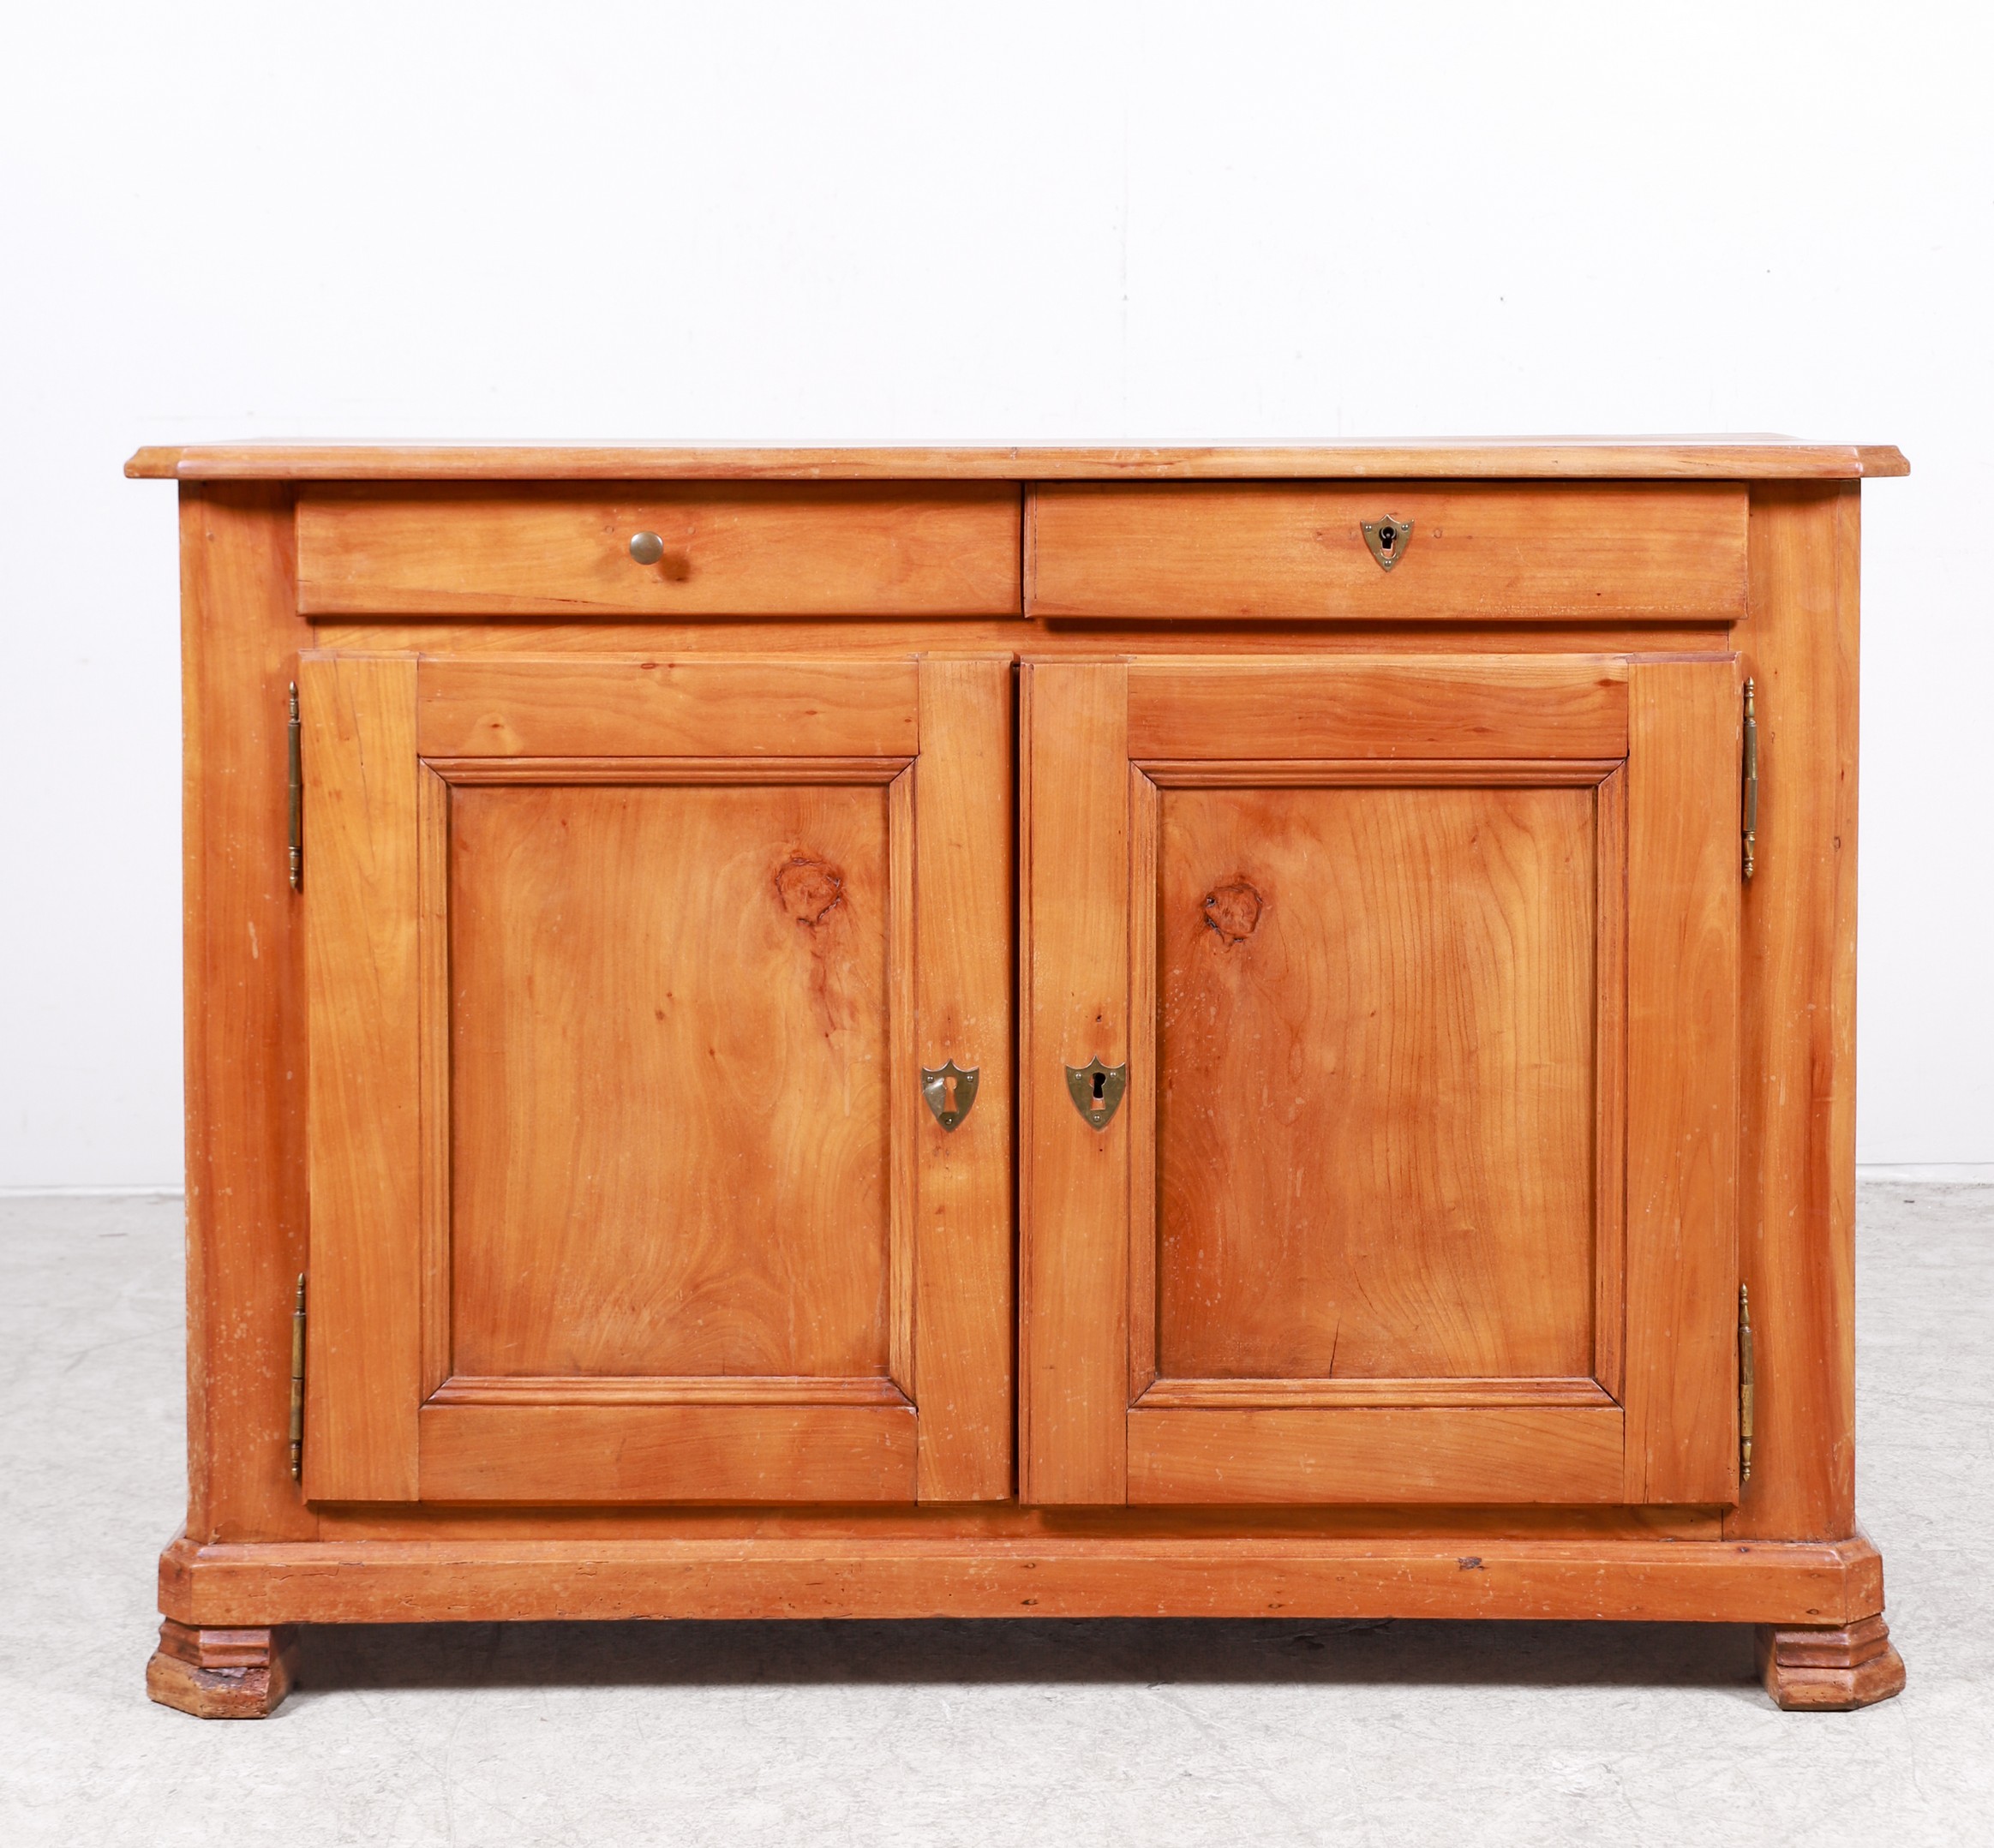 Cherry paneled cabinet, two drawers